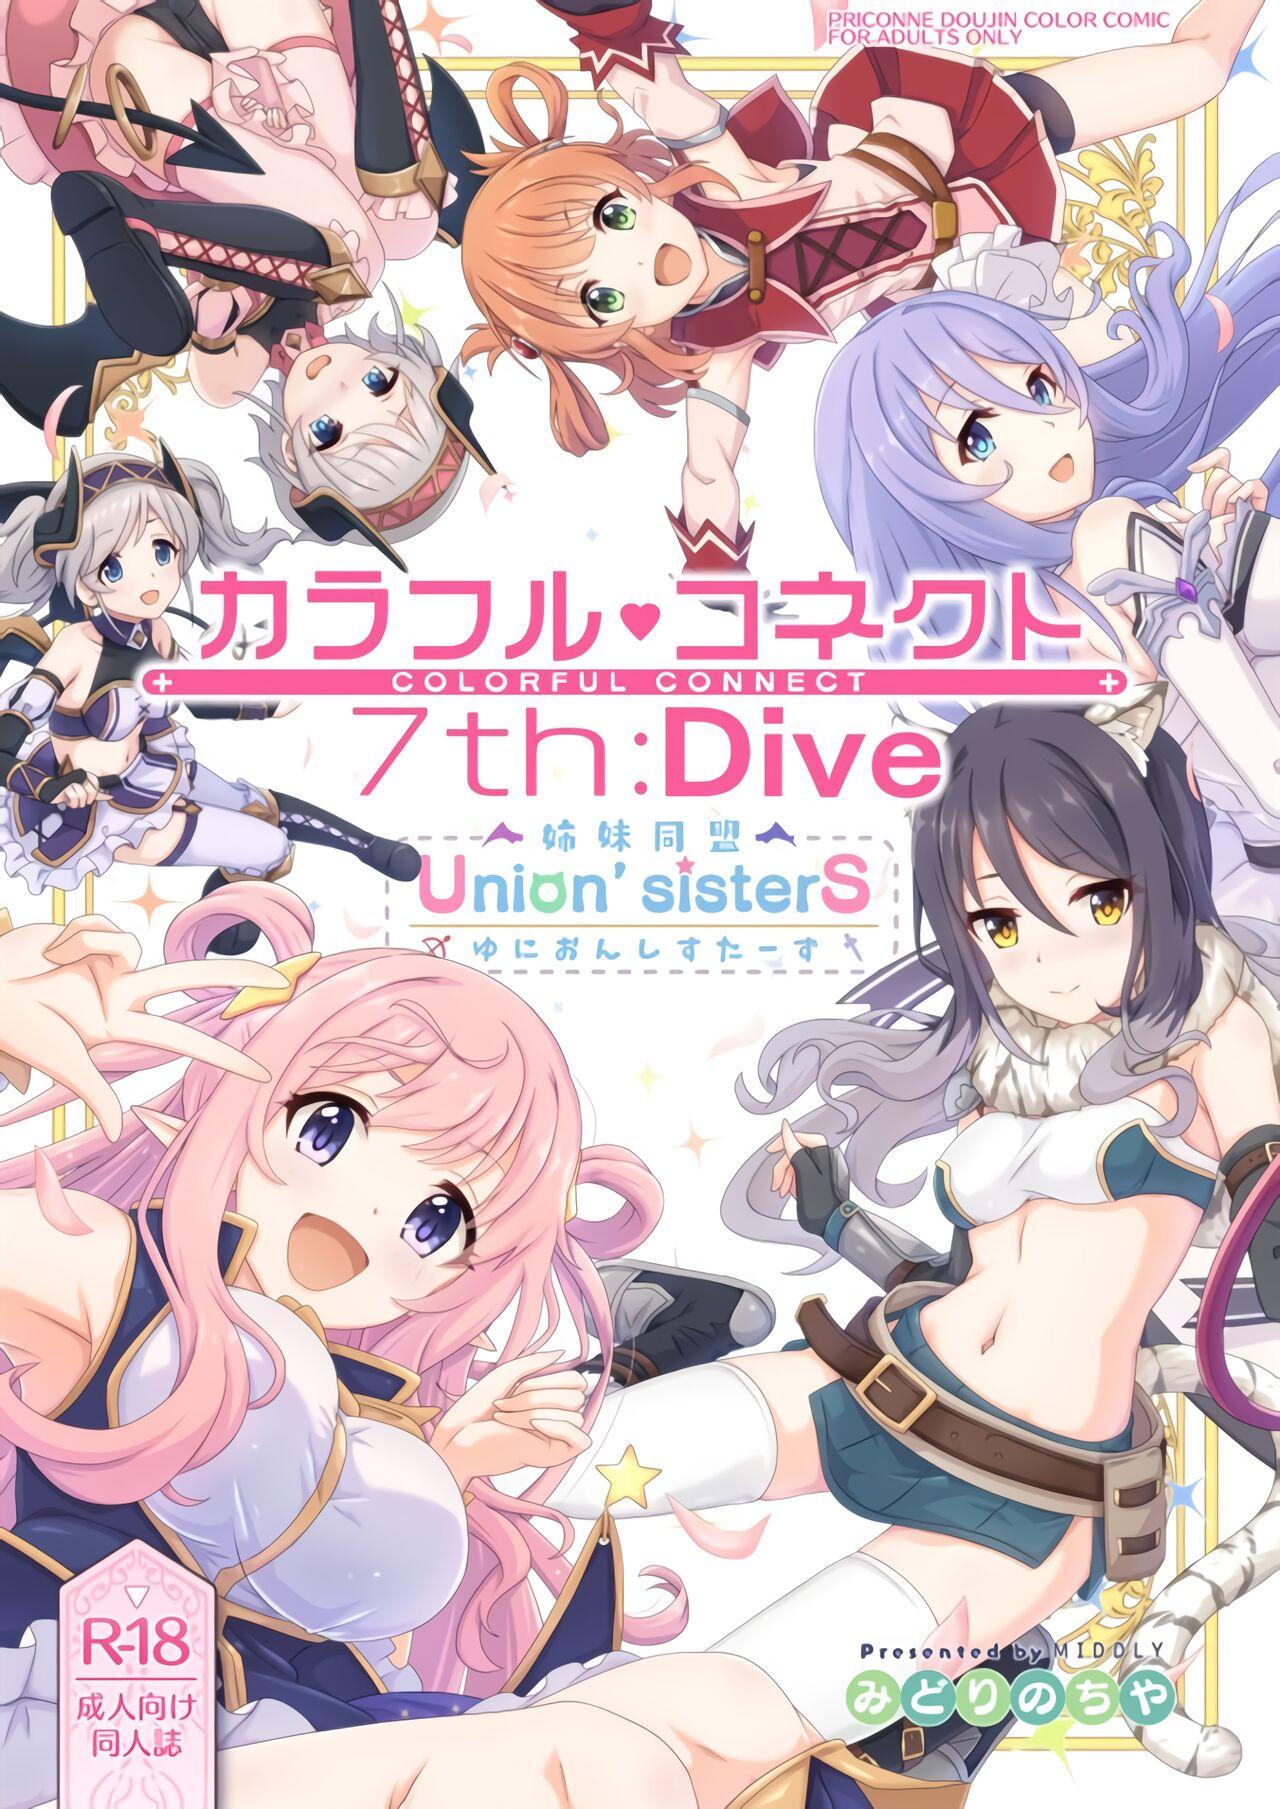 Gilf Colorful Connect 7th:Dive - Union Sisters - Princess connect Carro - Page 1